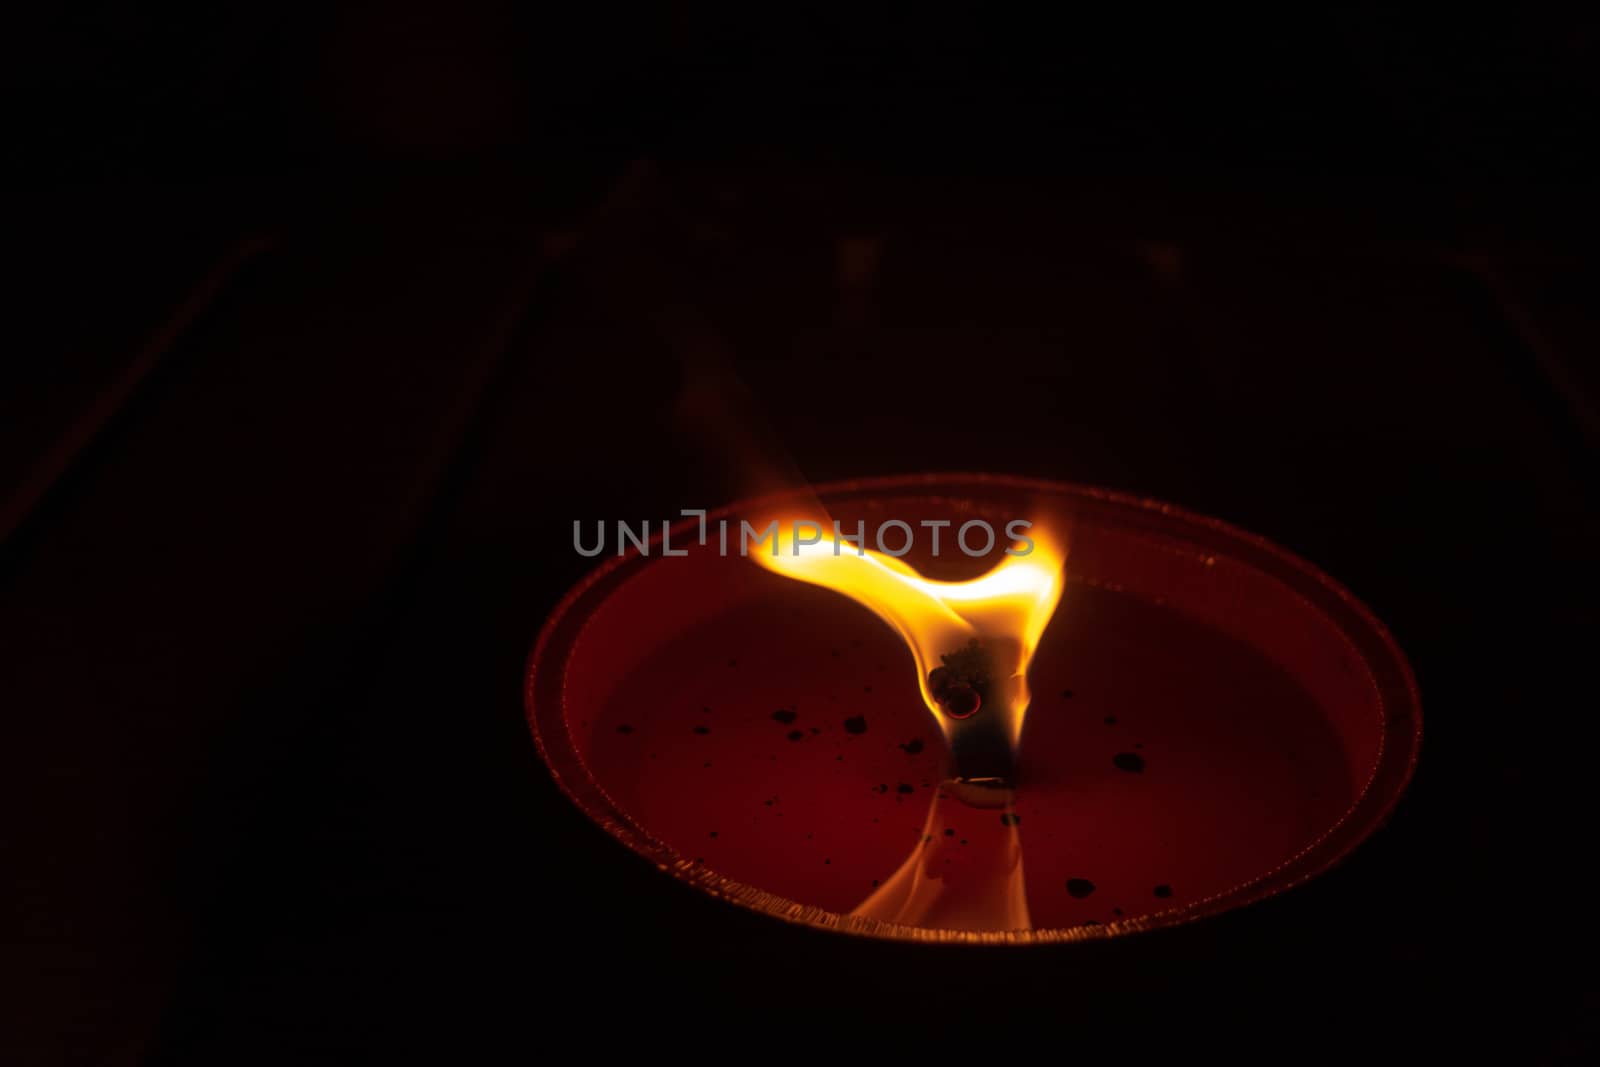 Candle flame close up on dark background, interesting flame figure, candle fire shape split on top